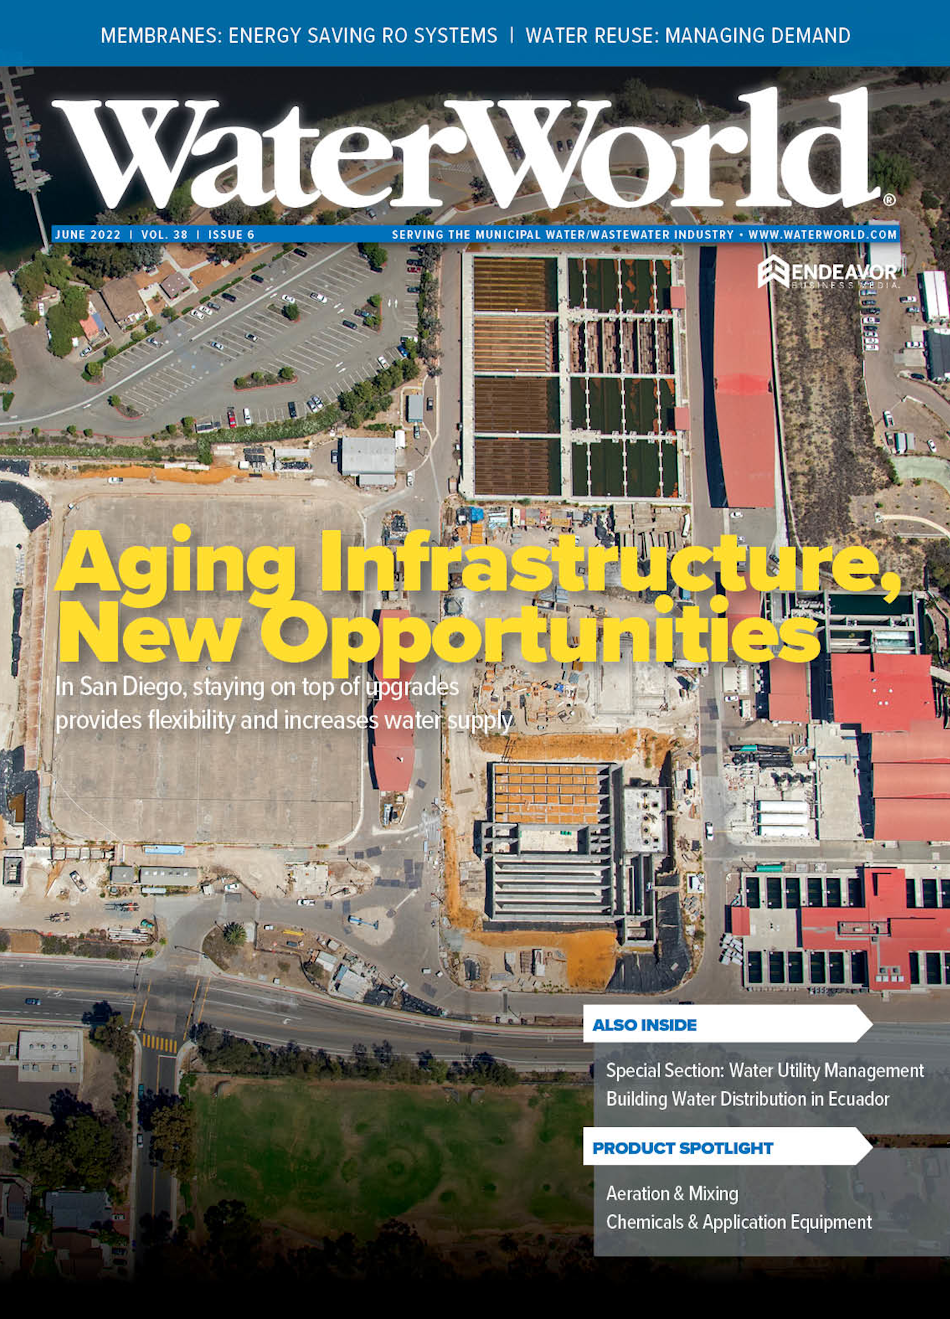 Volume 38, Issue 6, June 2022 cover image